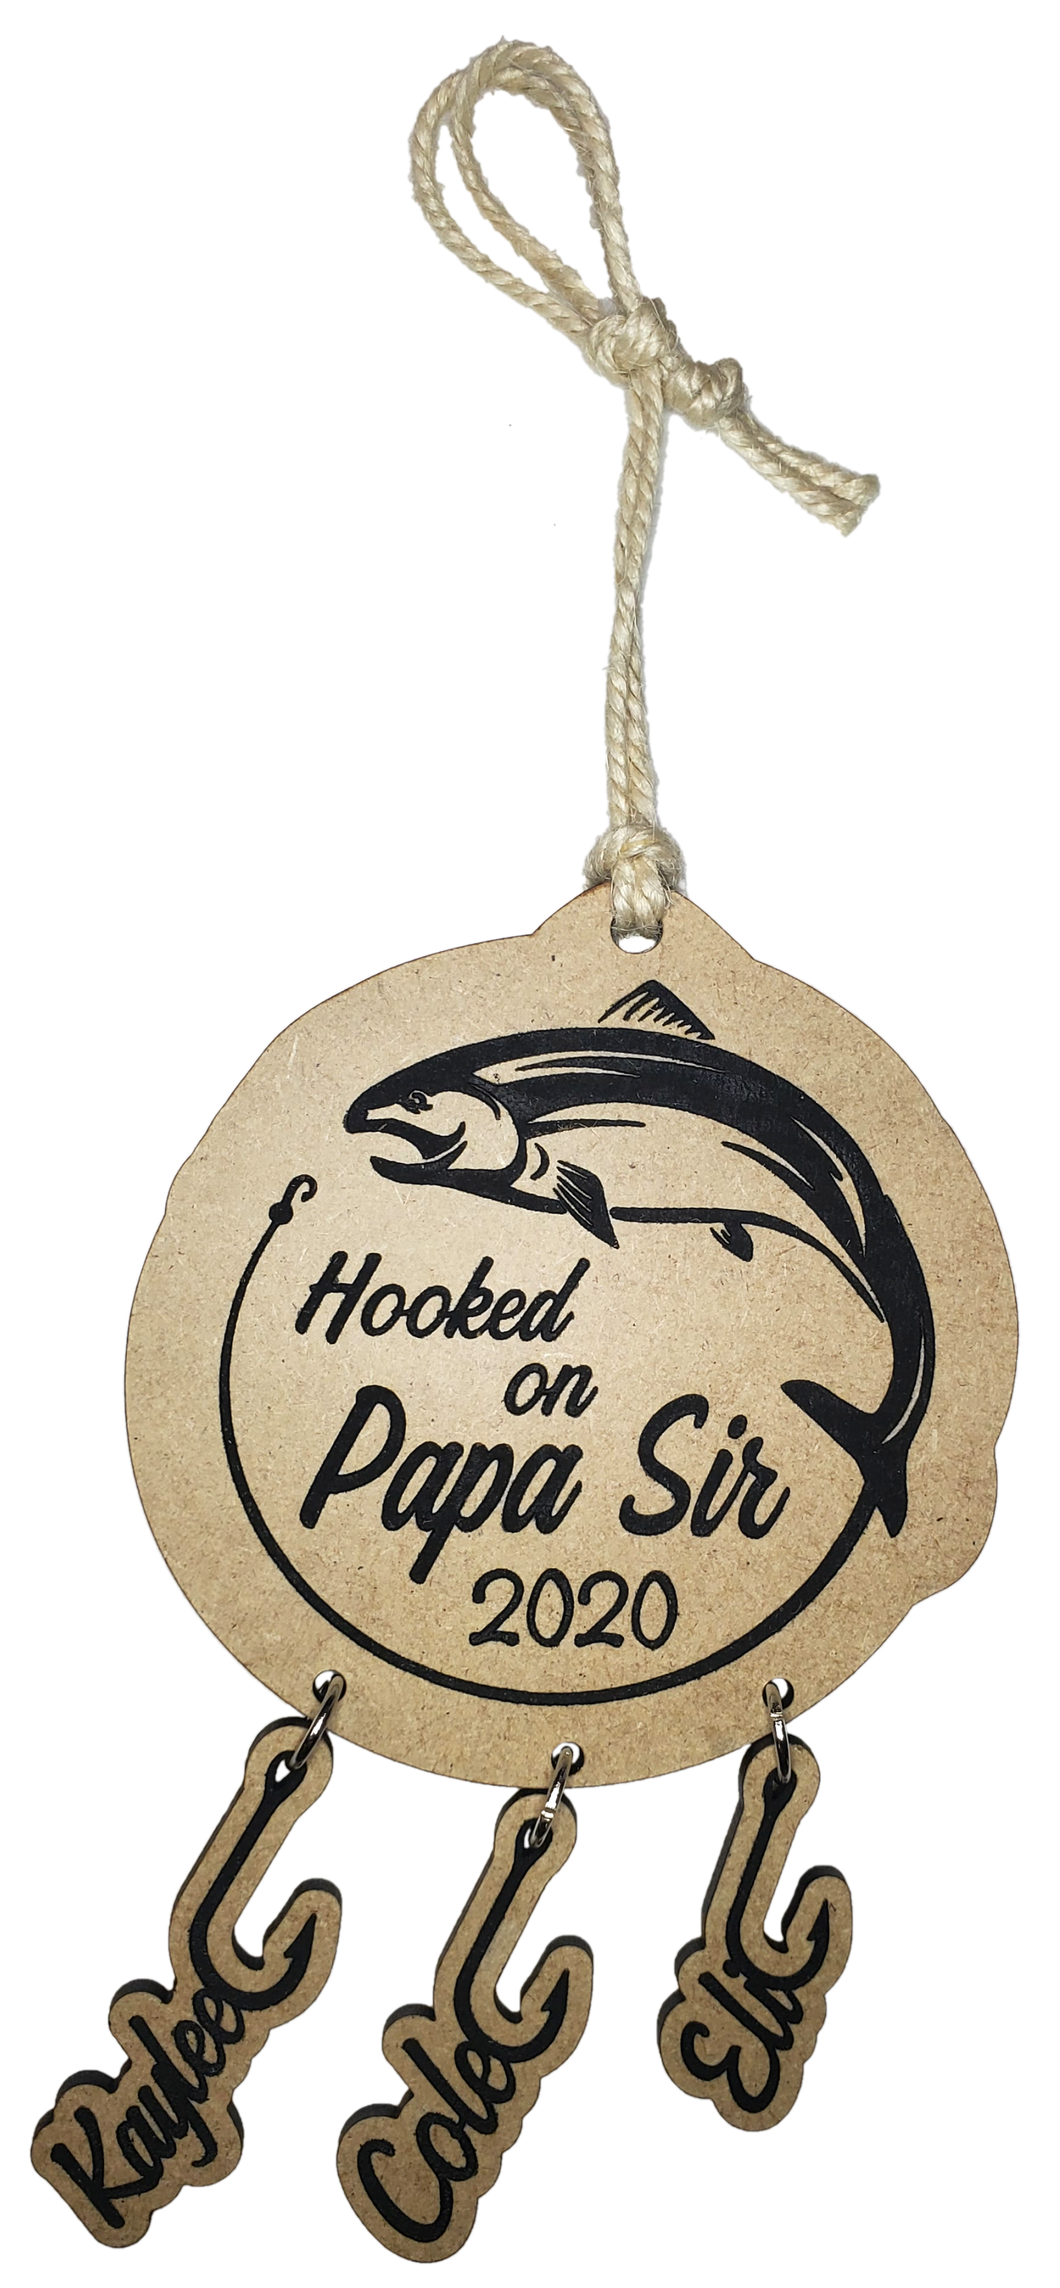 Fish On a Hook Ornament